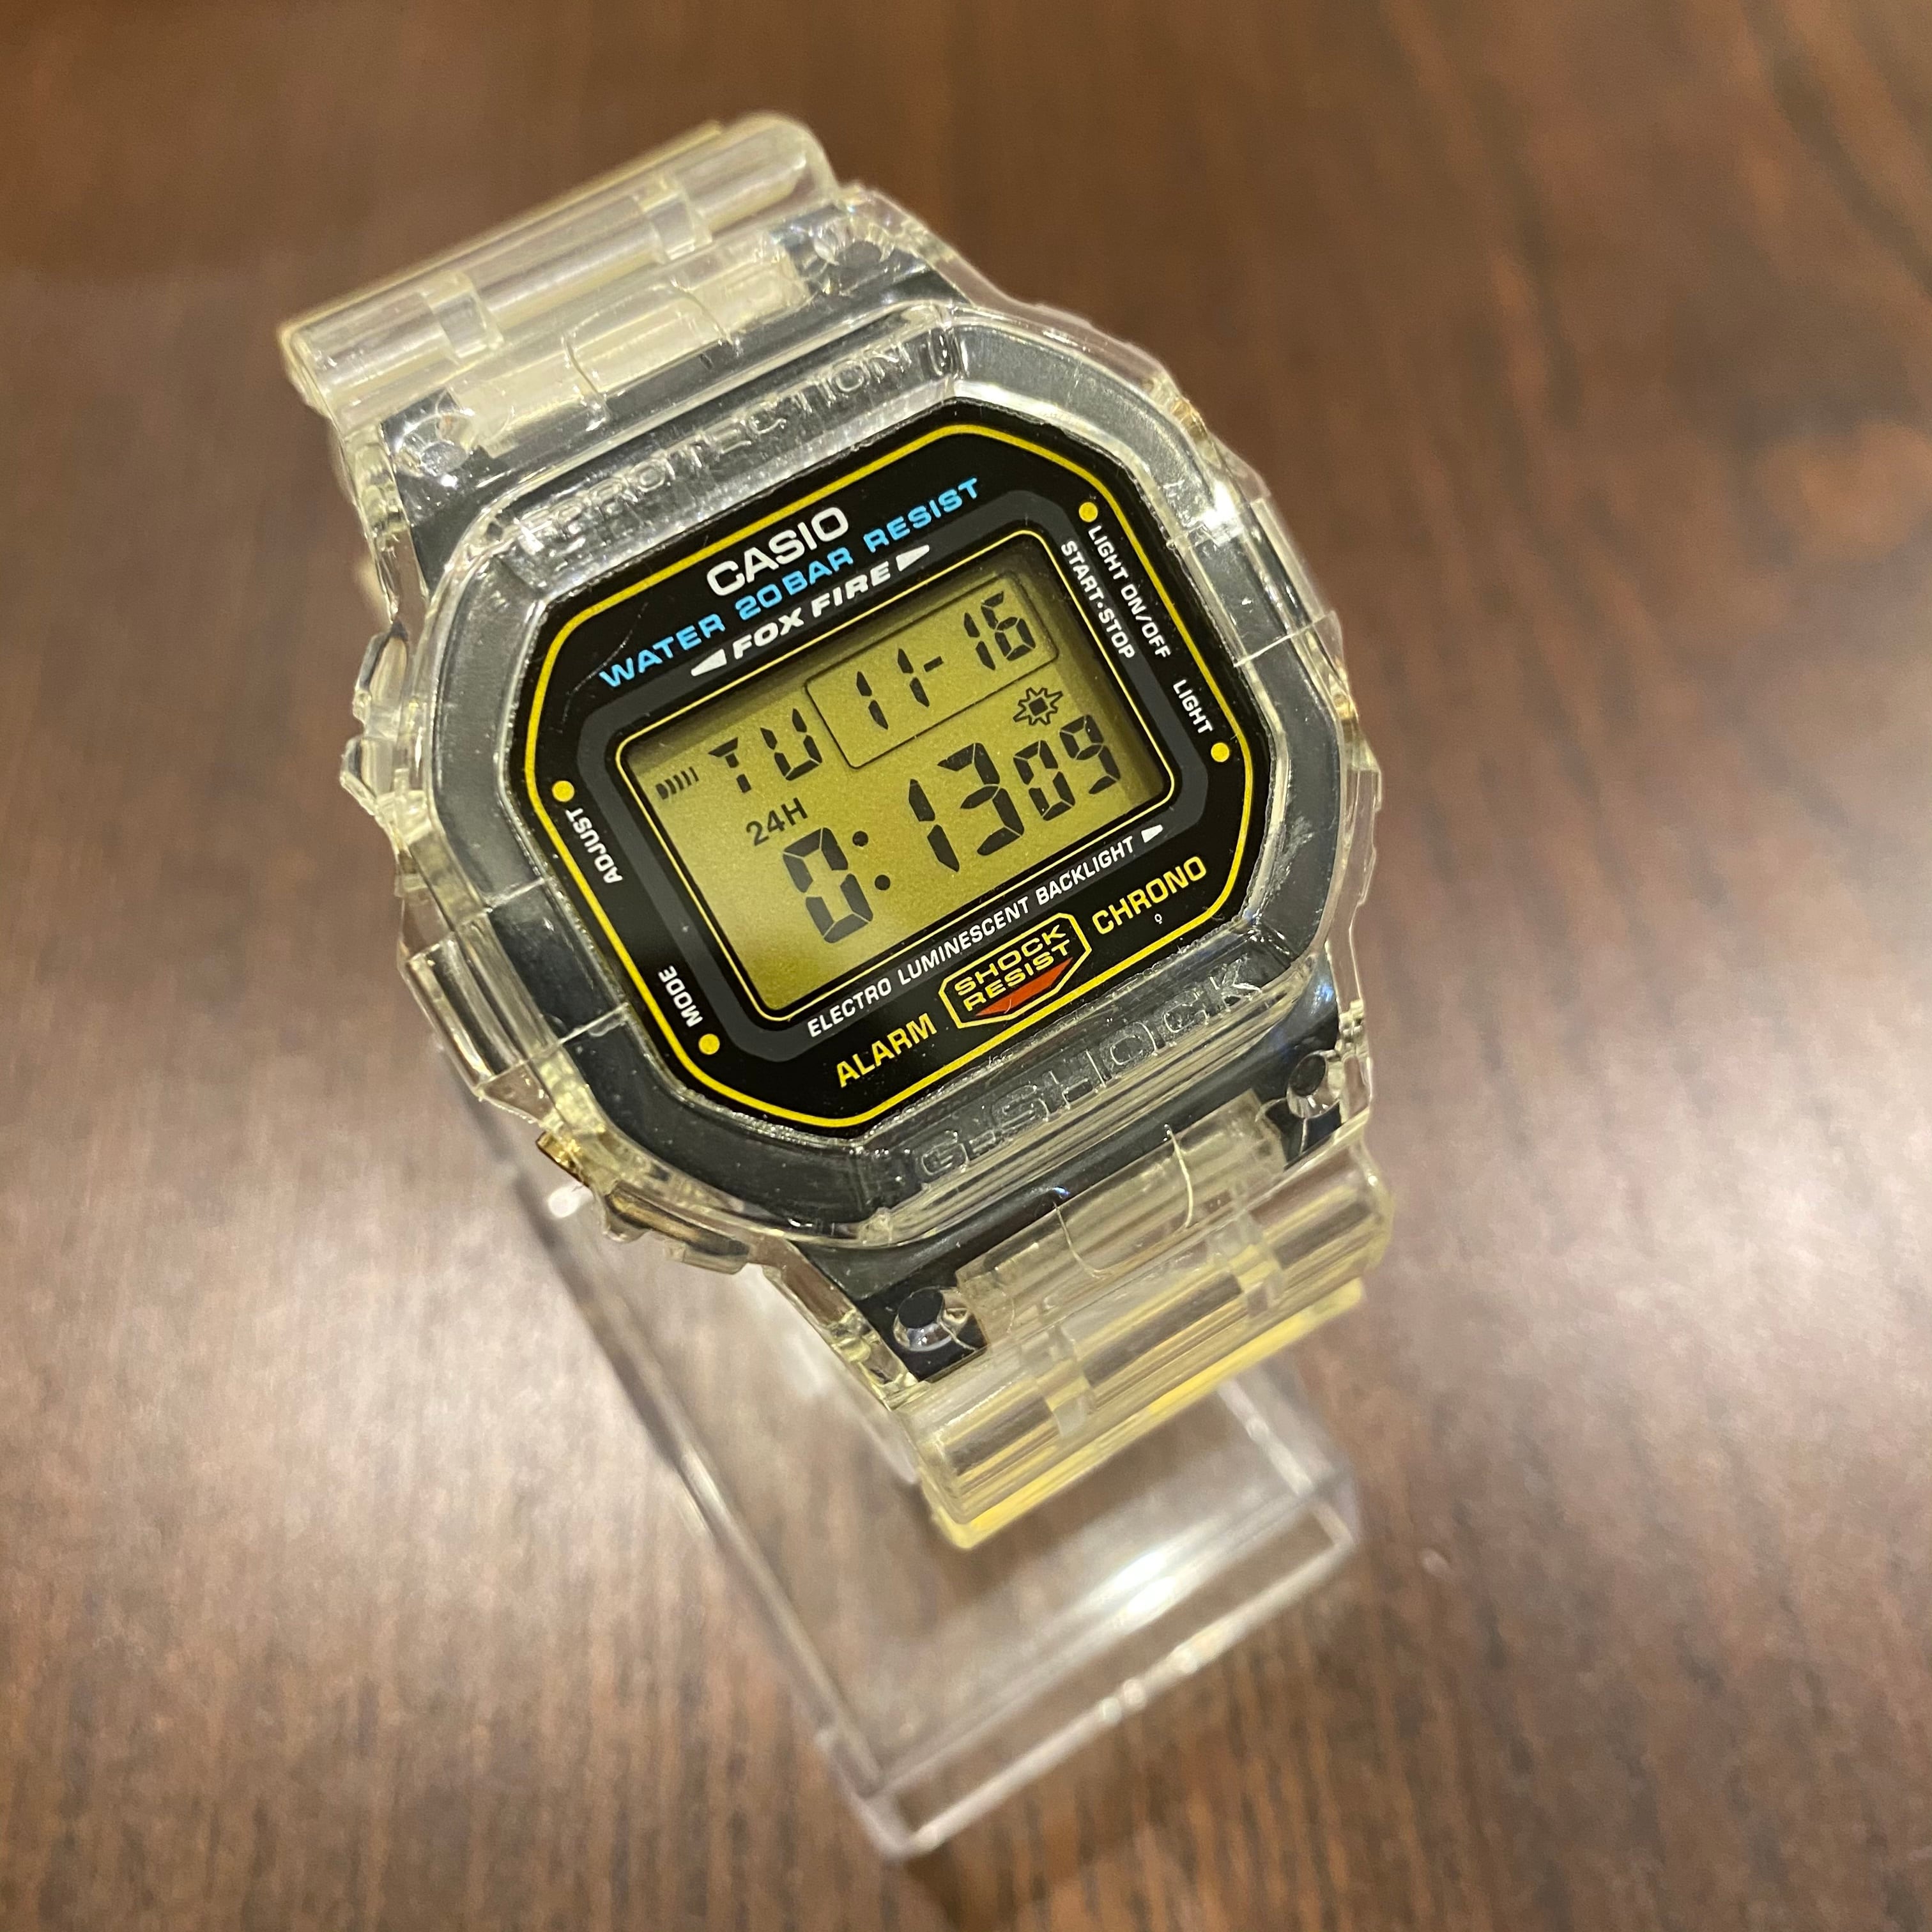 CASIO G-SHOCK DW-5600 スケルトンカスタム | kokopelli's watches and collectables  powered by BASE